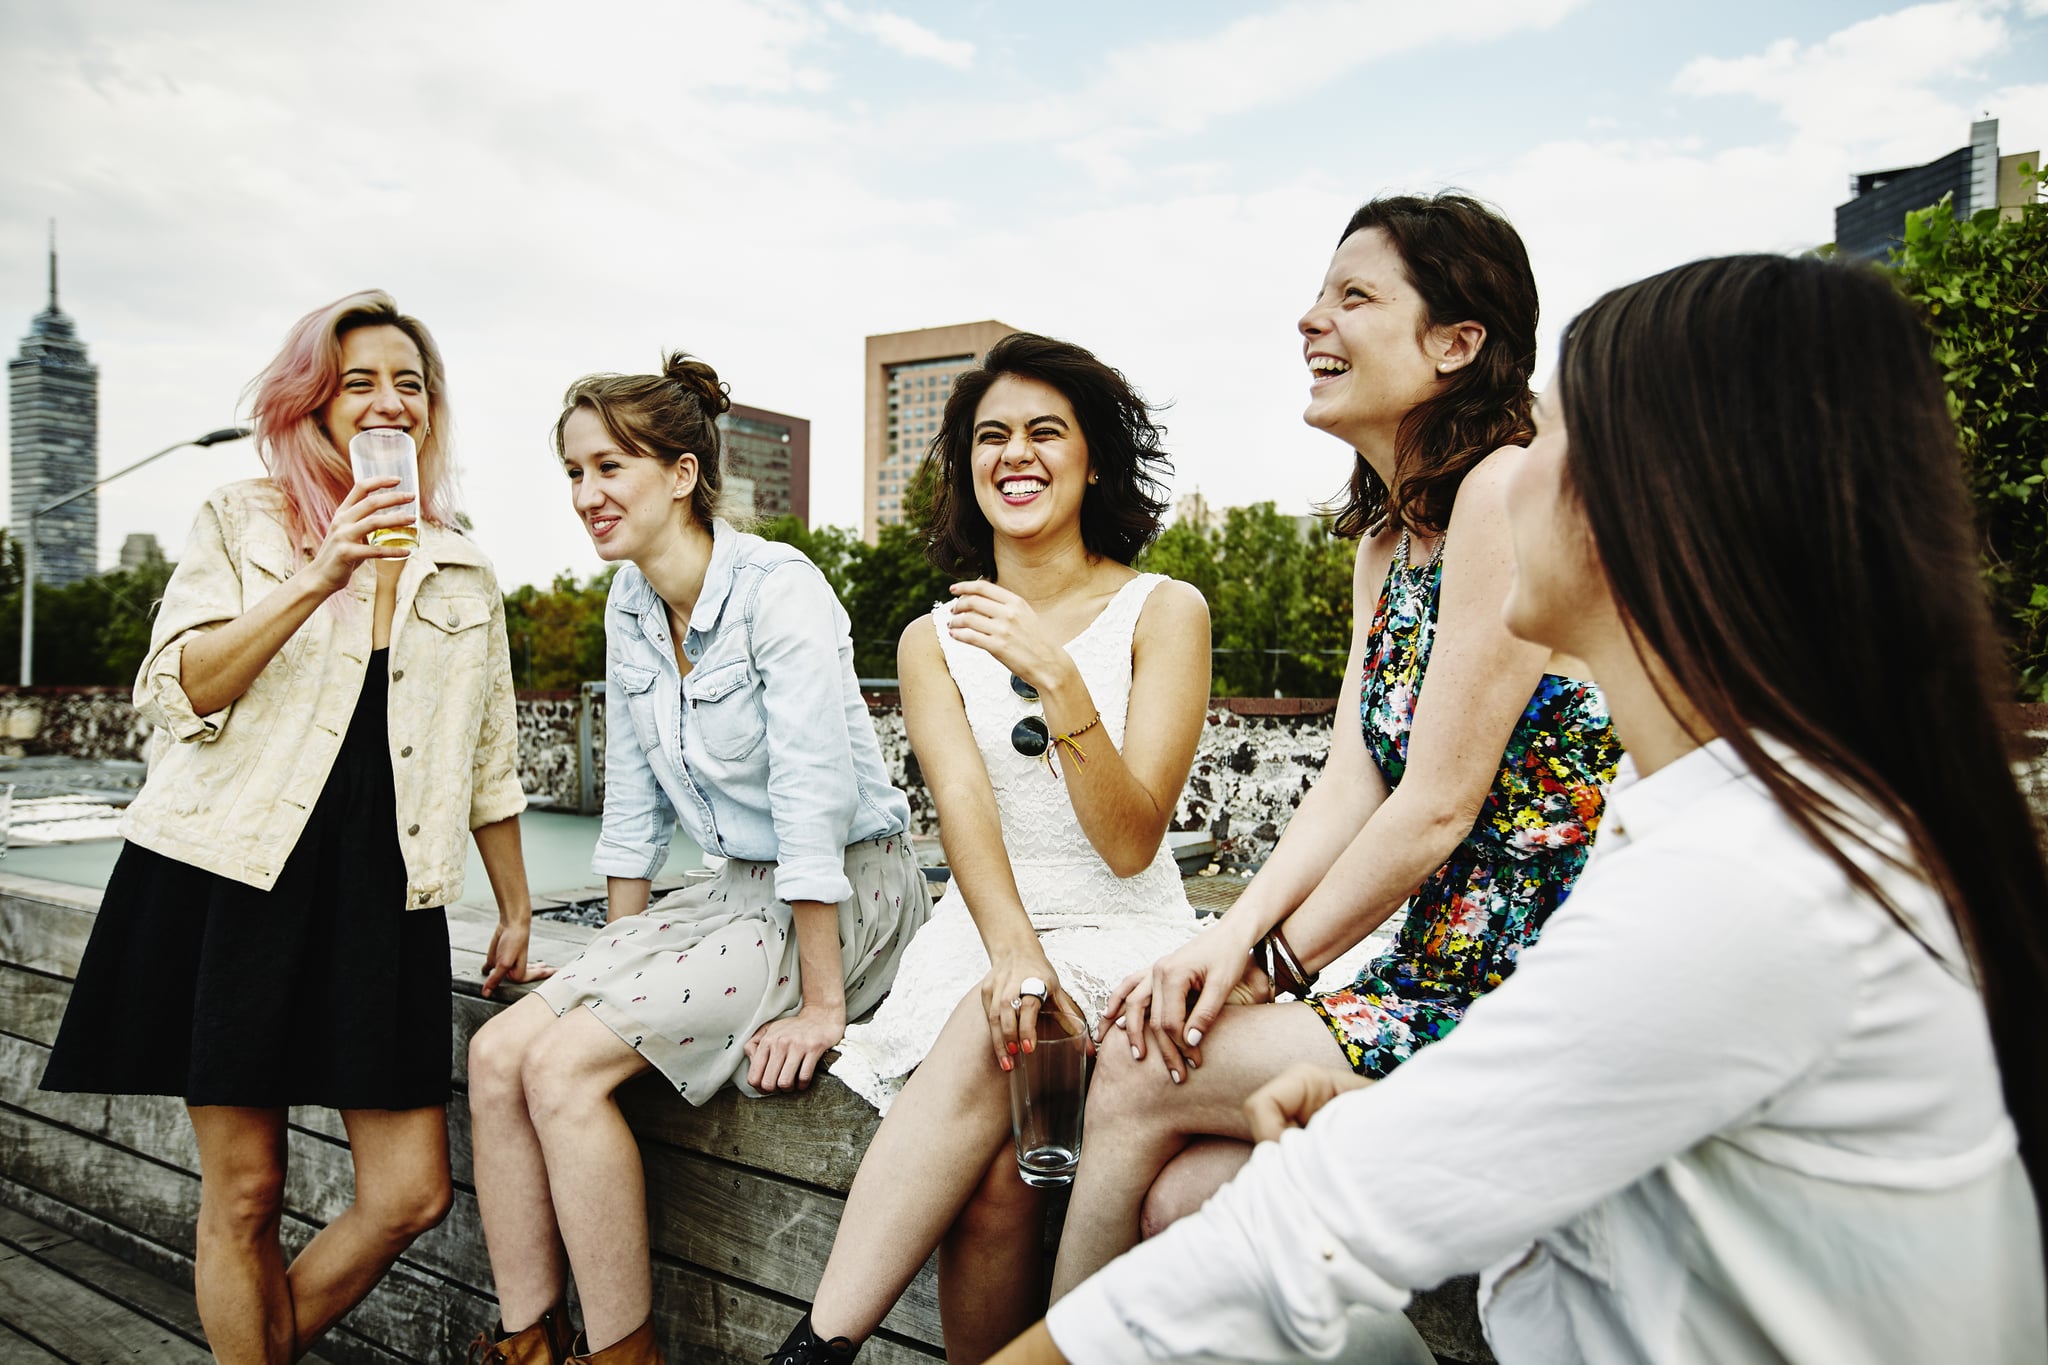 Laughing group of female friends having drinks together on rooftop deck